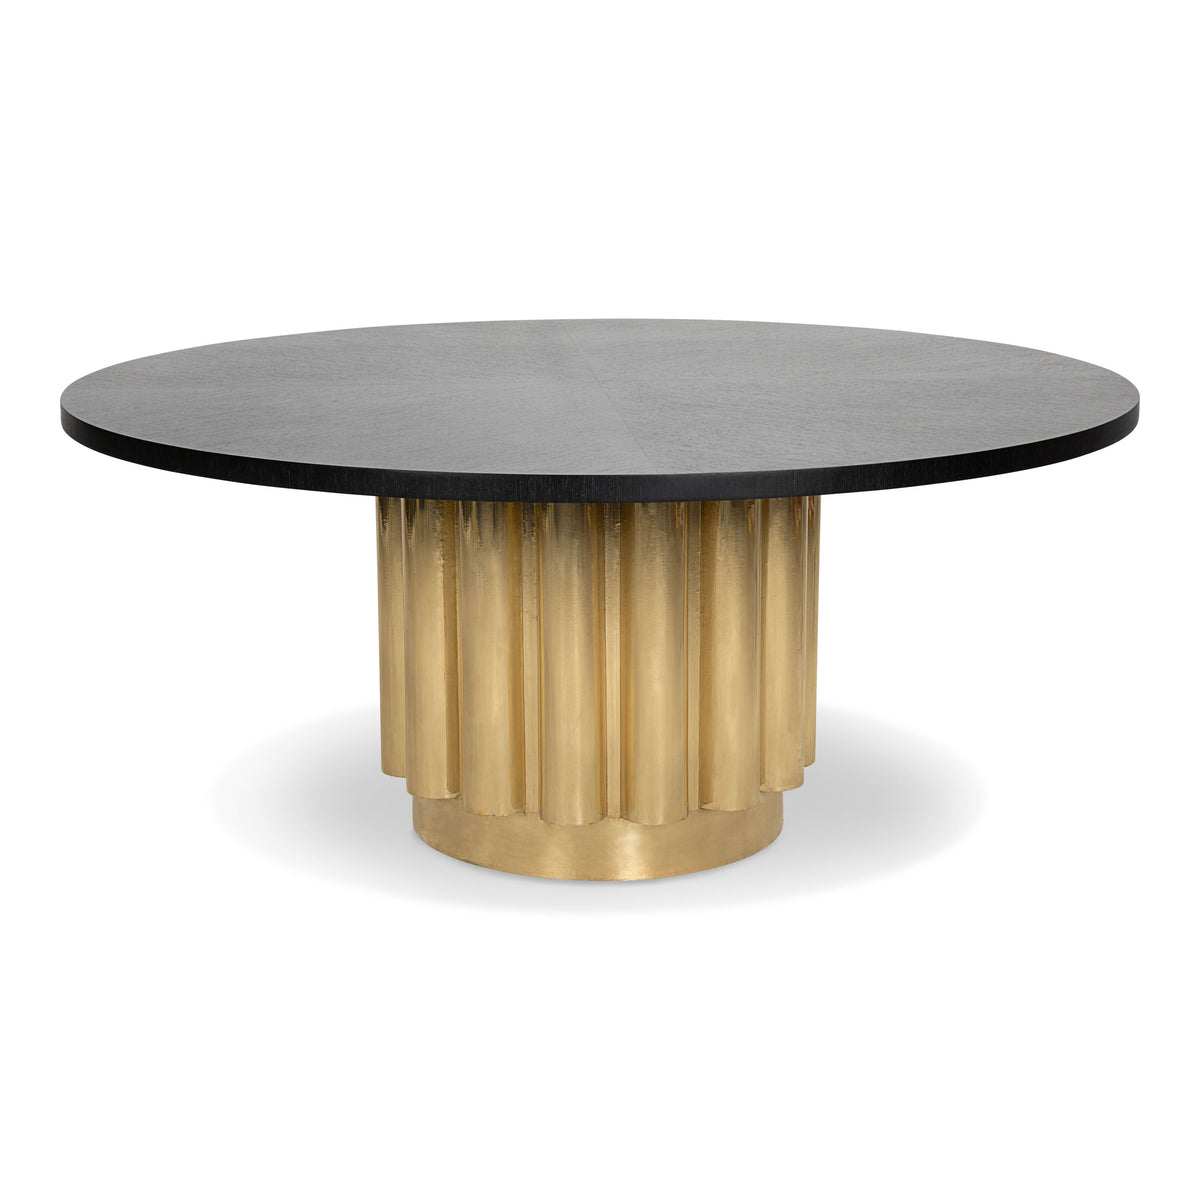 Eden Rock Dining Table in Shiny Brass Base